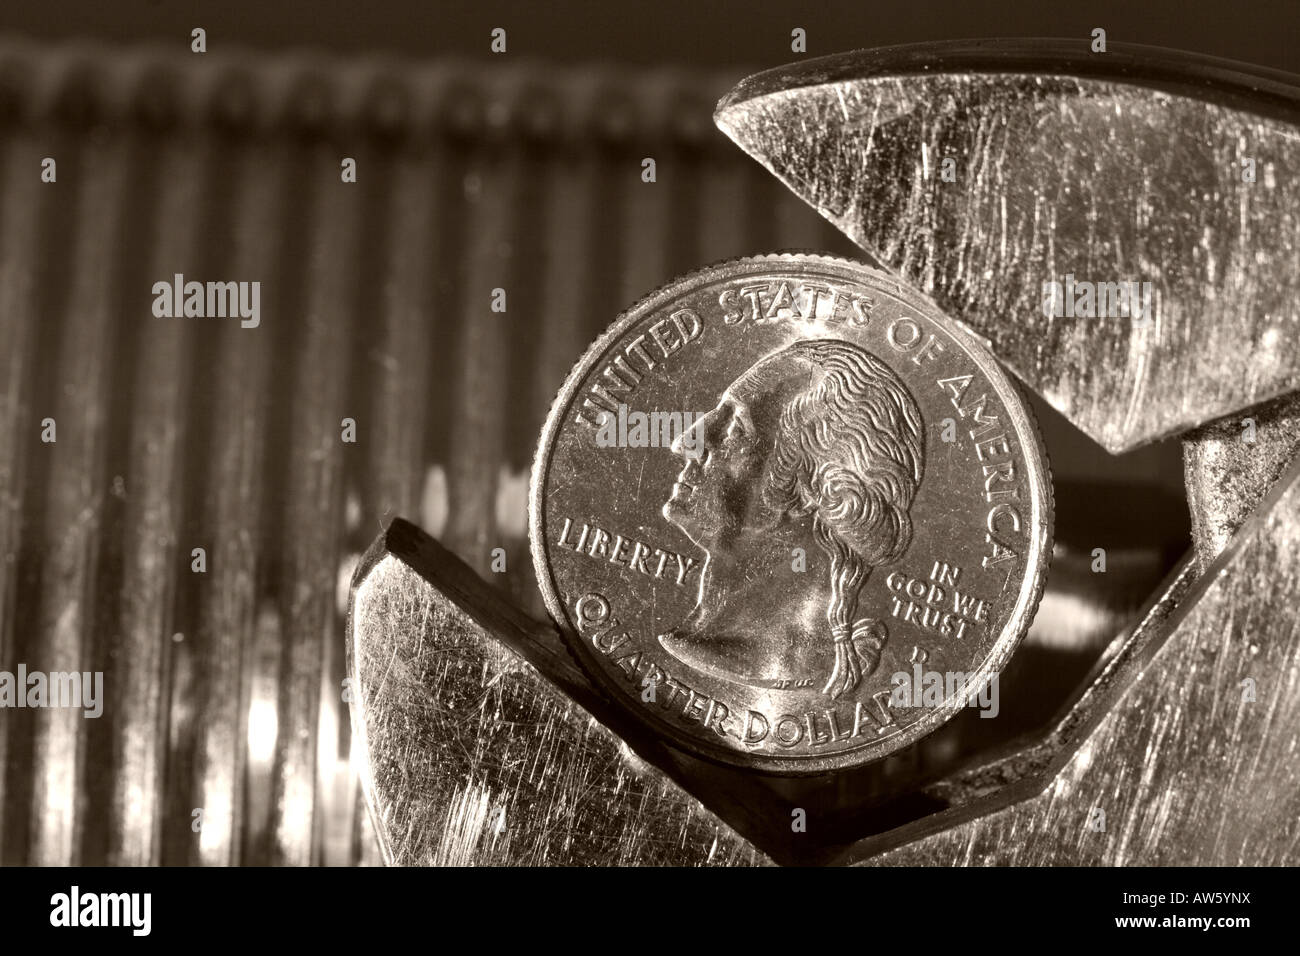 US quarter dollar coin in an industrial setting in an adjustable spanner tool Stock Photo